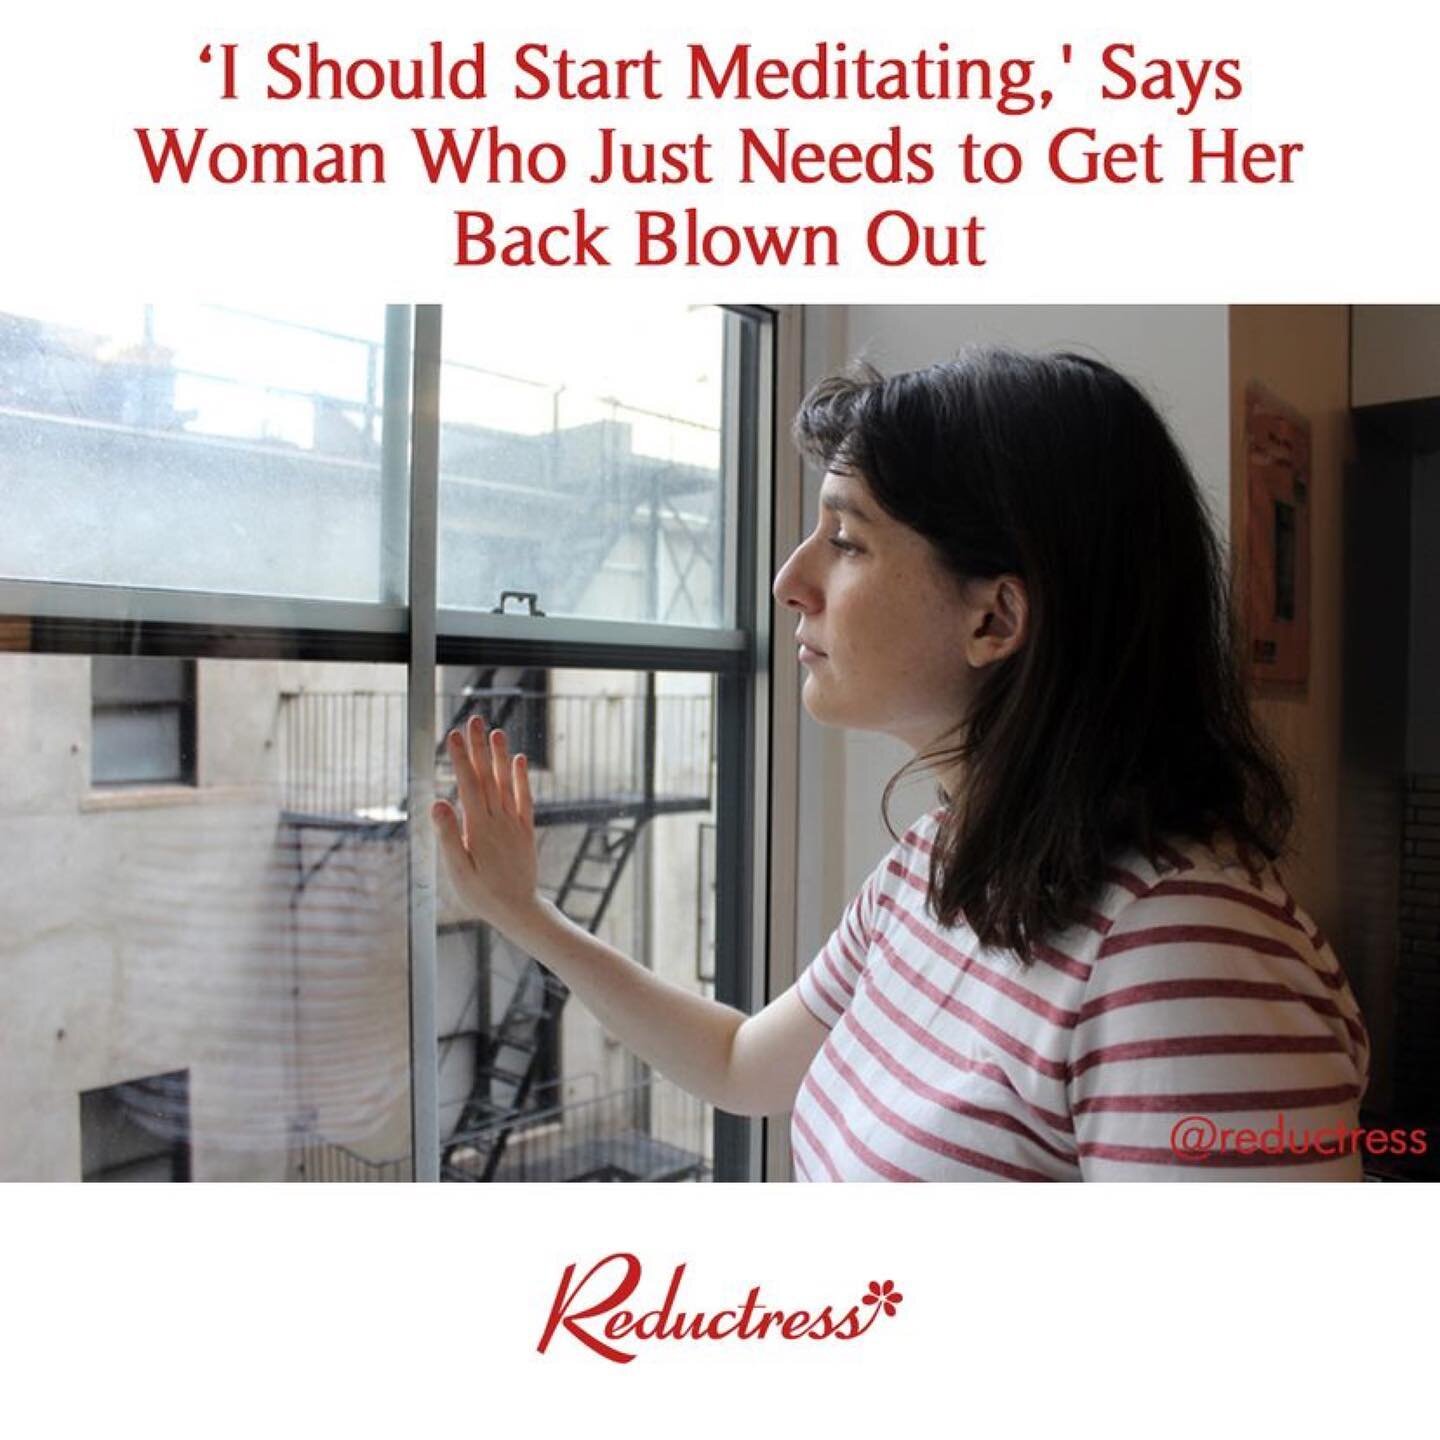 &quot;I just need some quiet time to myself,&quot; says the woman who just really needs a deep dicking. @reductress 

As a mediation teacher, I support this!! 👏👏👏😈😝🥳

But if a deep dickin isn&rsquo;t available to you right now, maybe come join 